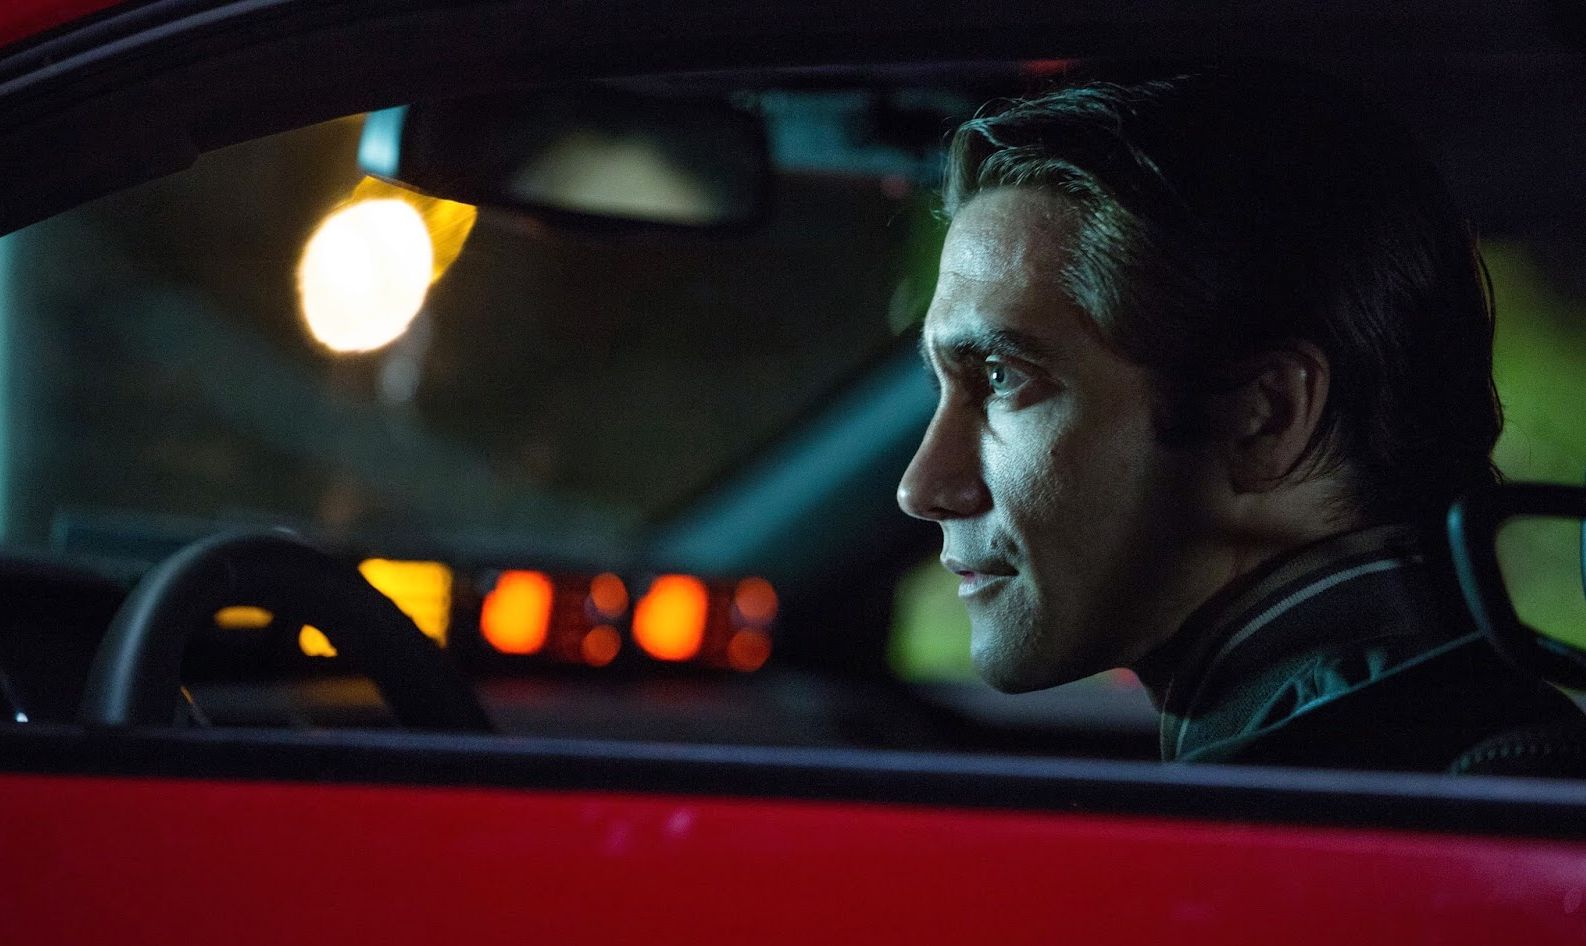 Jake Gyllenhaal watching from his cherry red Challenger in N